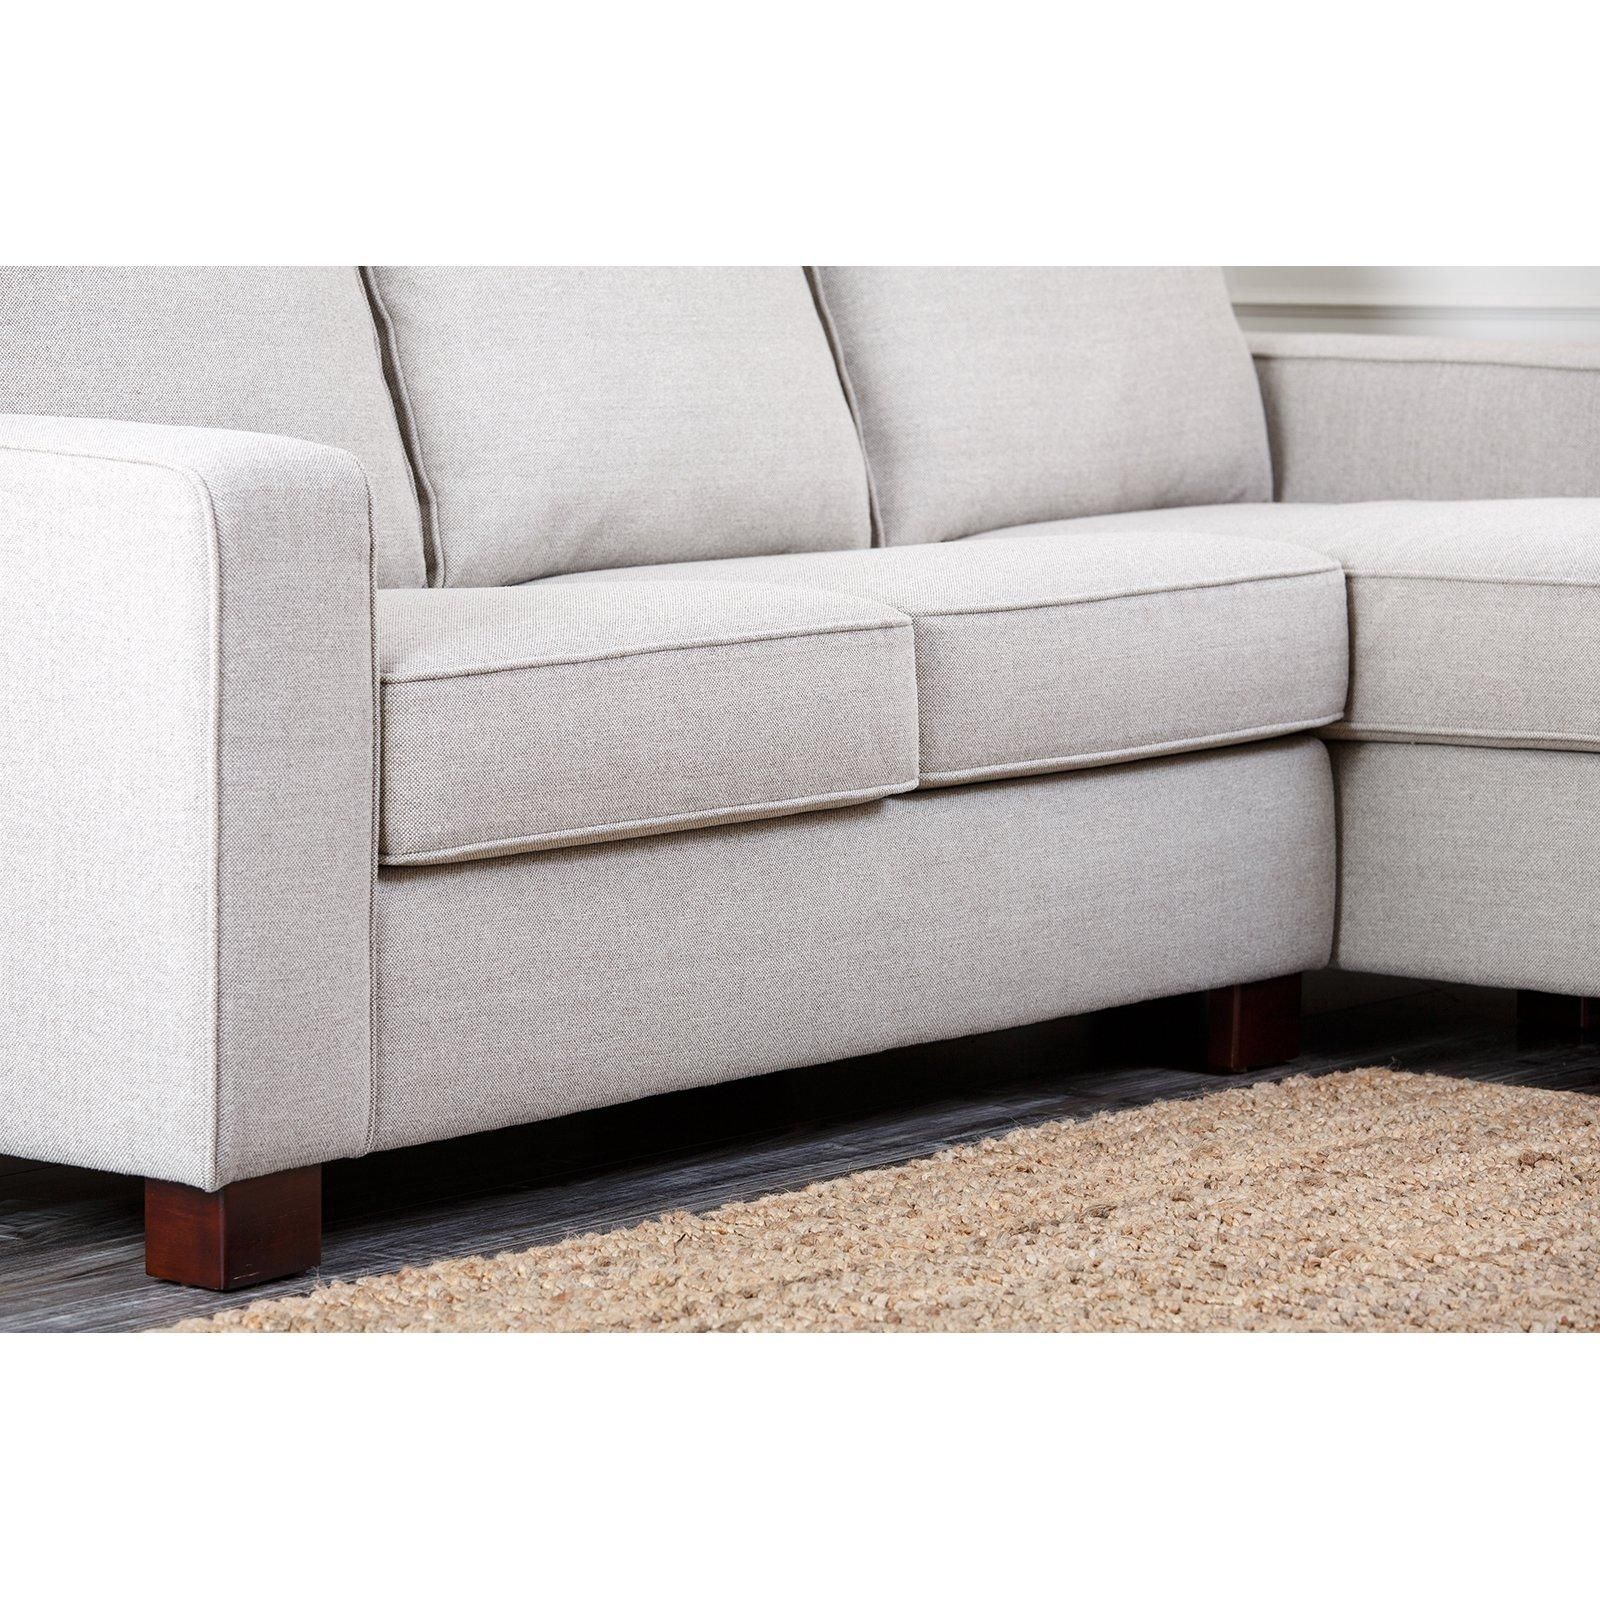 Abbyson Regina Sectional Sofa – Gray | Hayneedle For Abbyson Sectional Sofas (View 8 of 20)